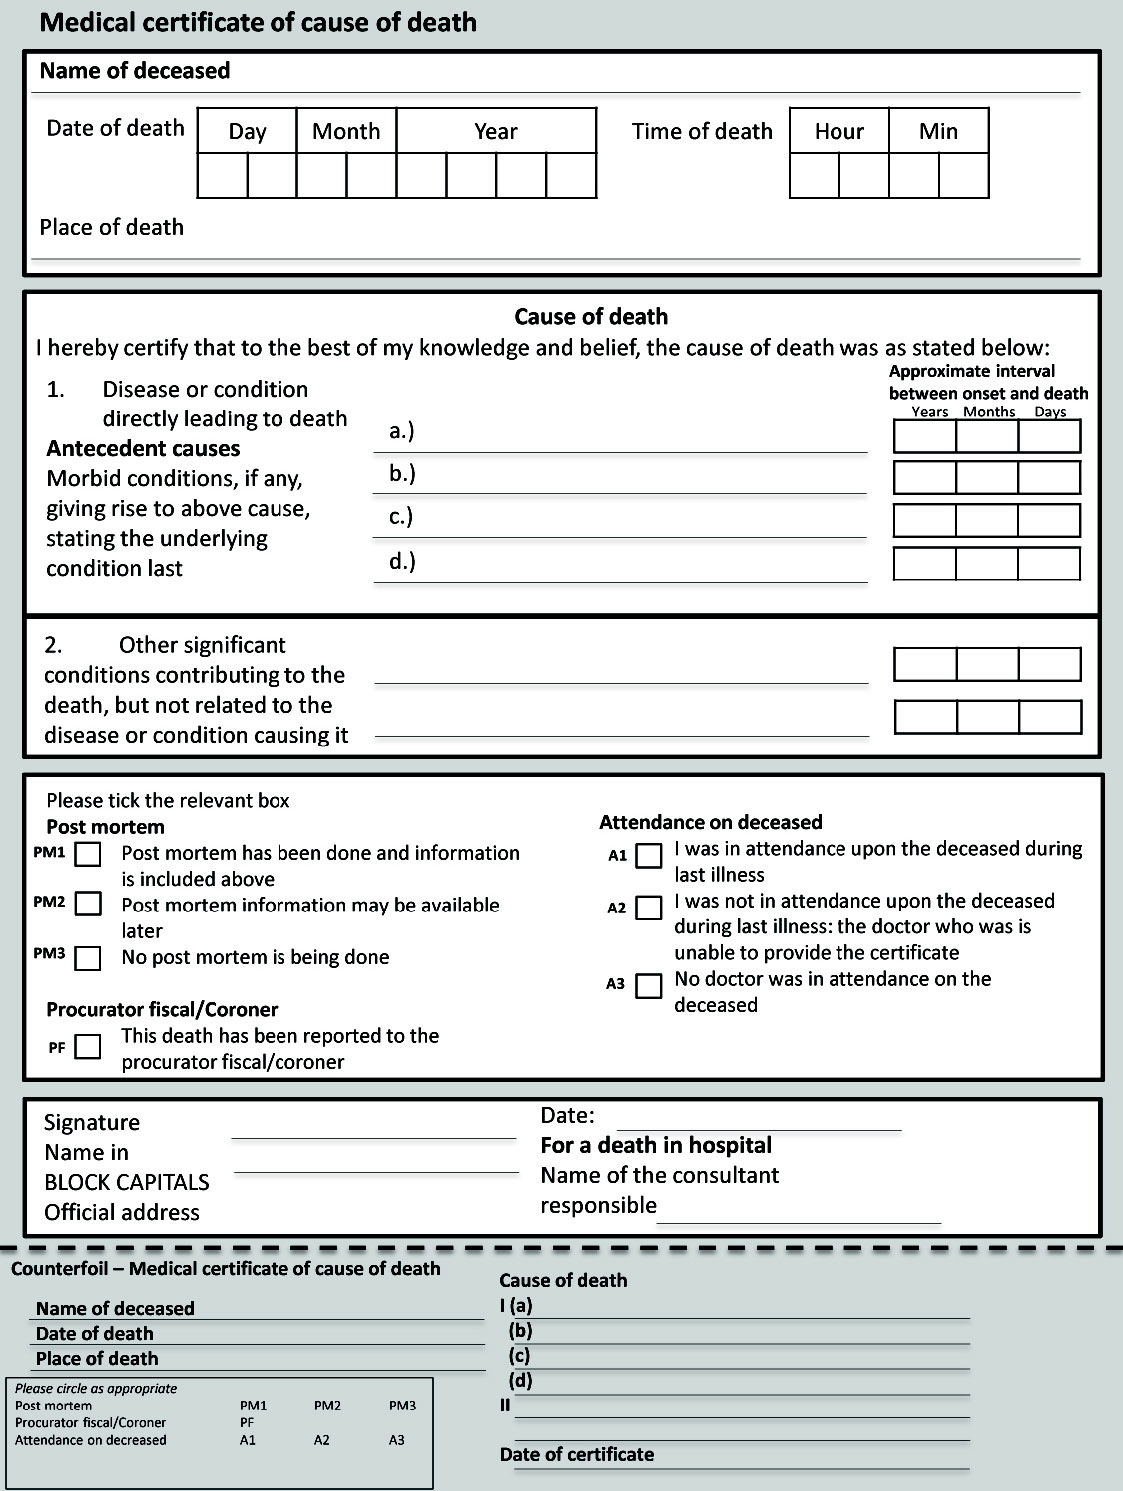 Unofficial Guide to Passing OSCEs - Candidate Briefings - Death Certificate Blank image